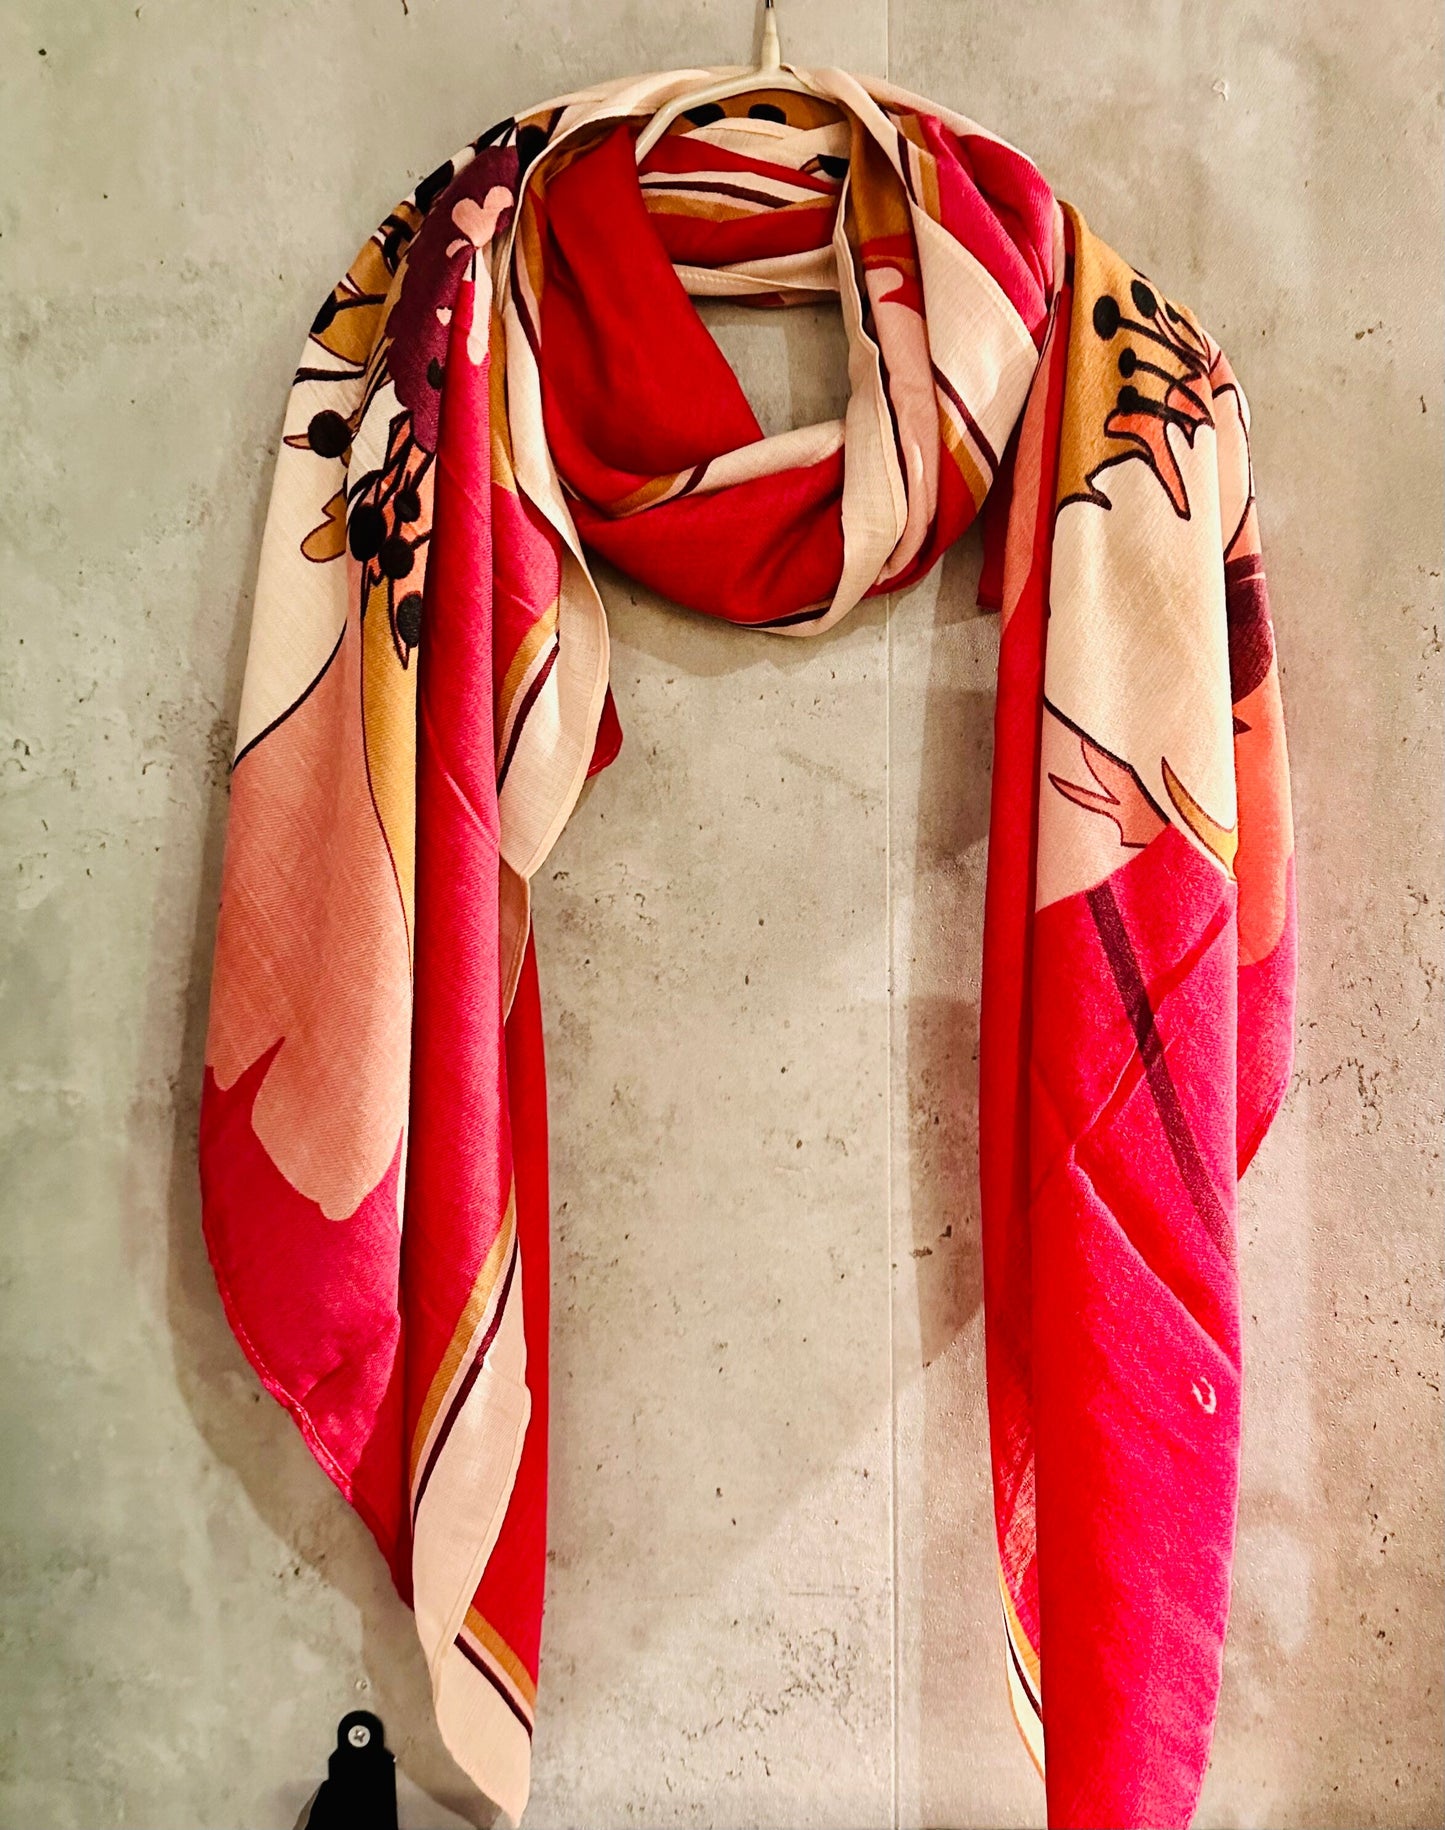 Bright Pink Organic Cotton Scarf with Huge Sketched Peony Flower – An Eco-Friendly Gift for Mom on Any Occasion